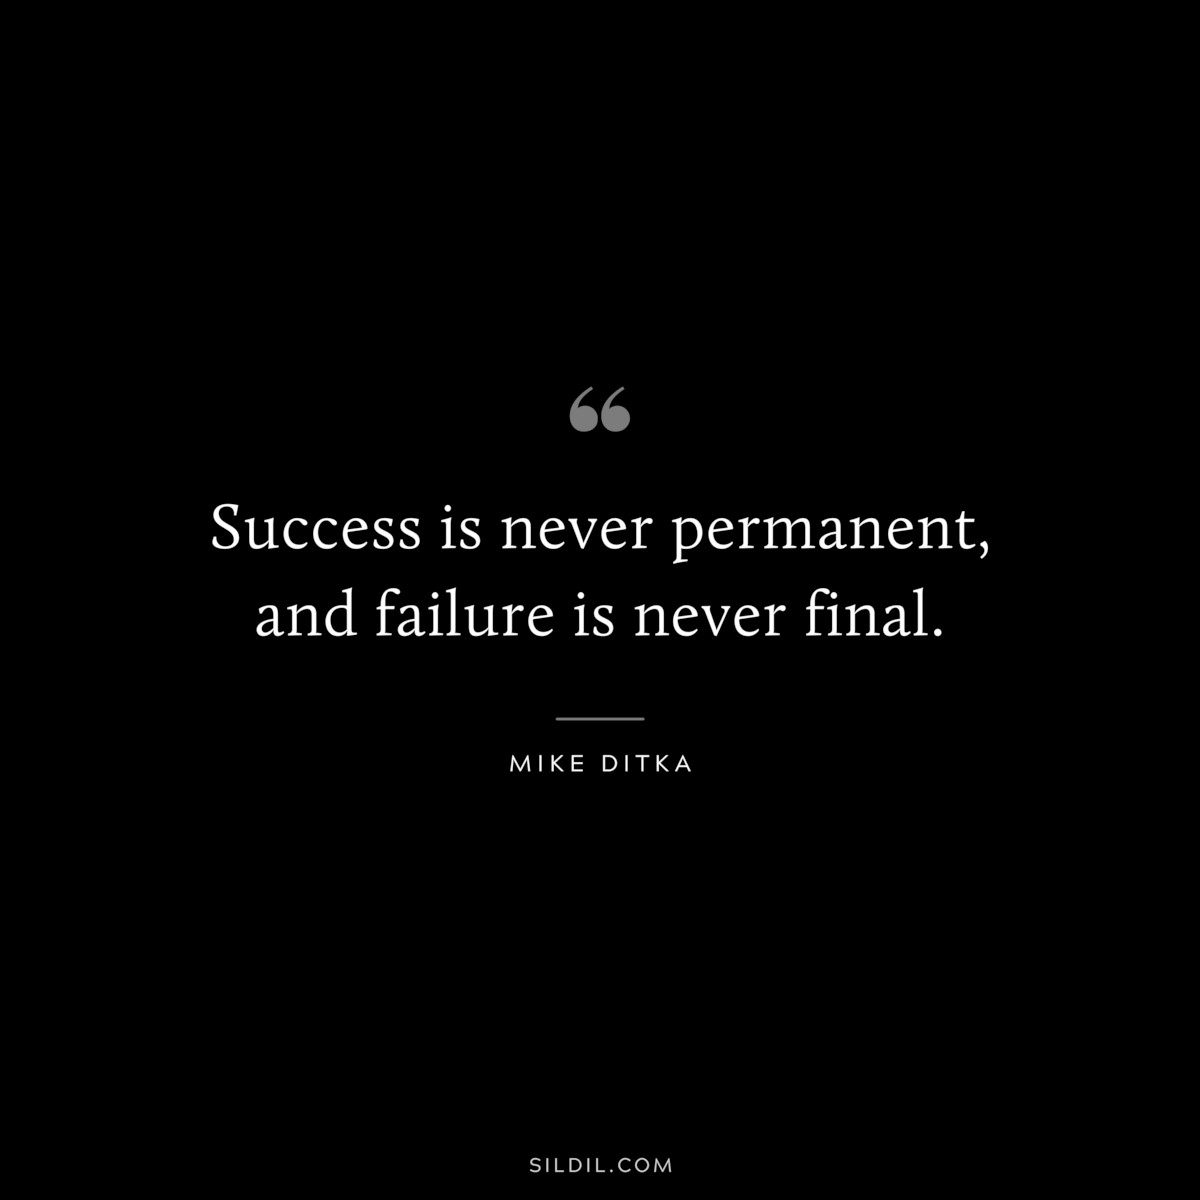 Success is never permanent, and failure is never final. ― Mike Ditka